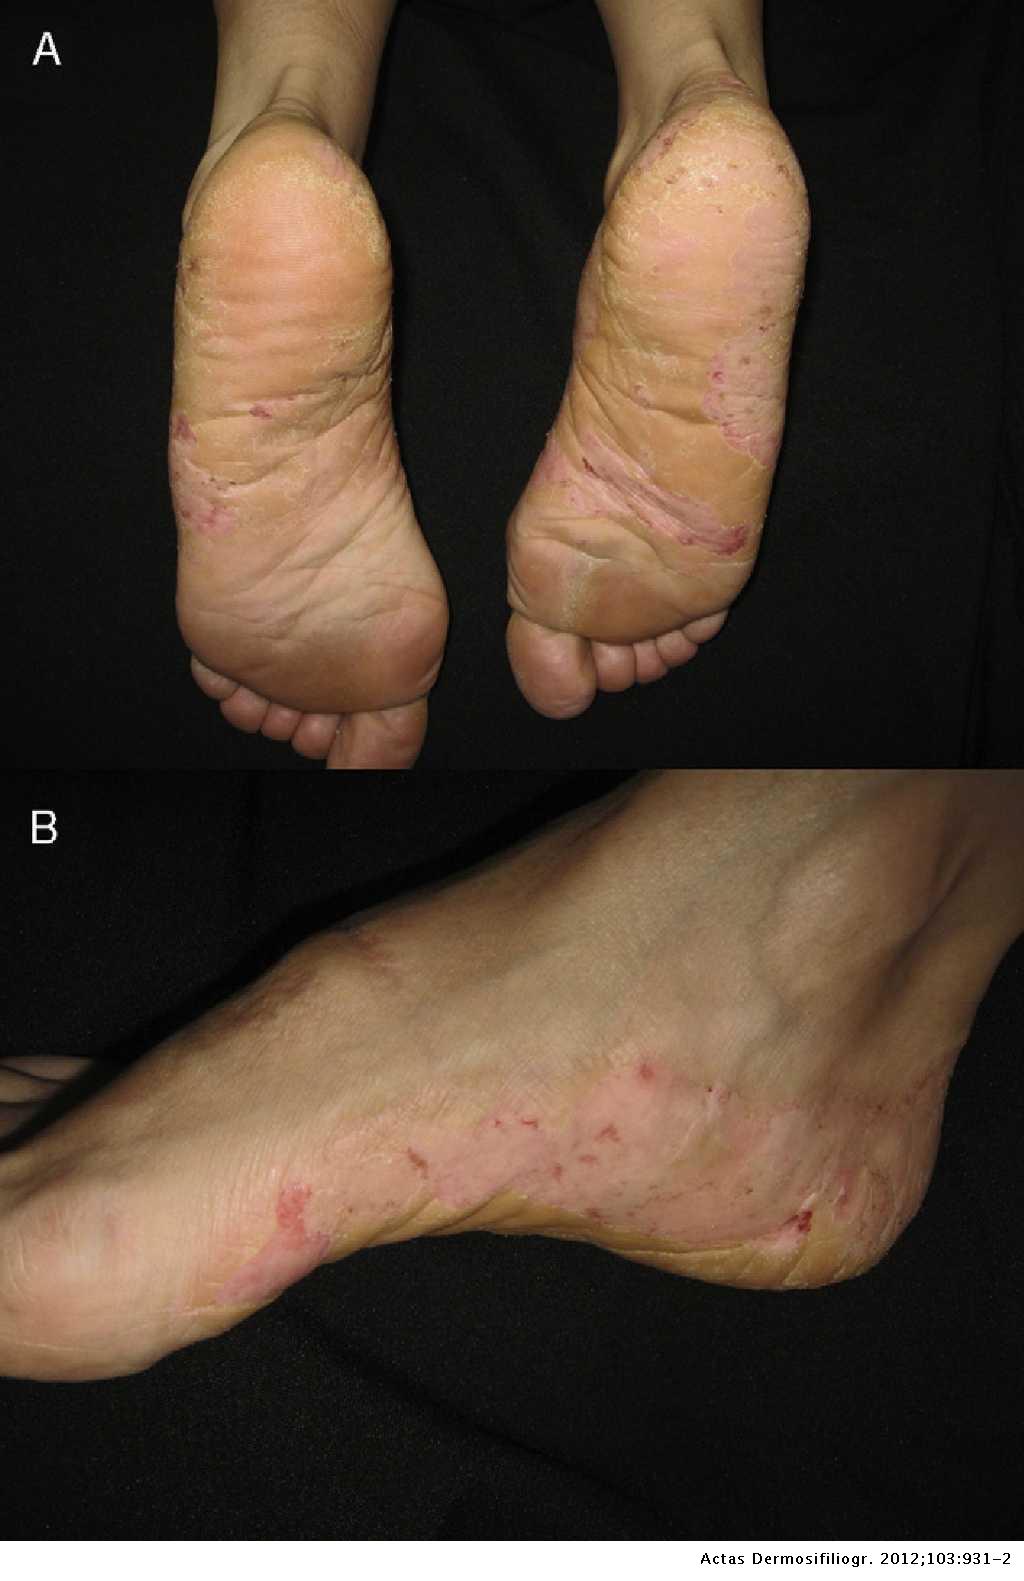 Successful Treatment Of Recalcitrant Chronic Foot Eczema With